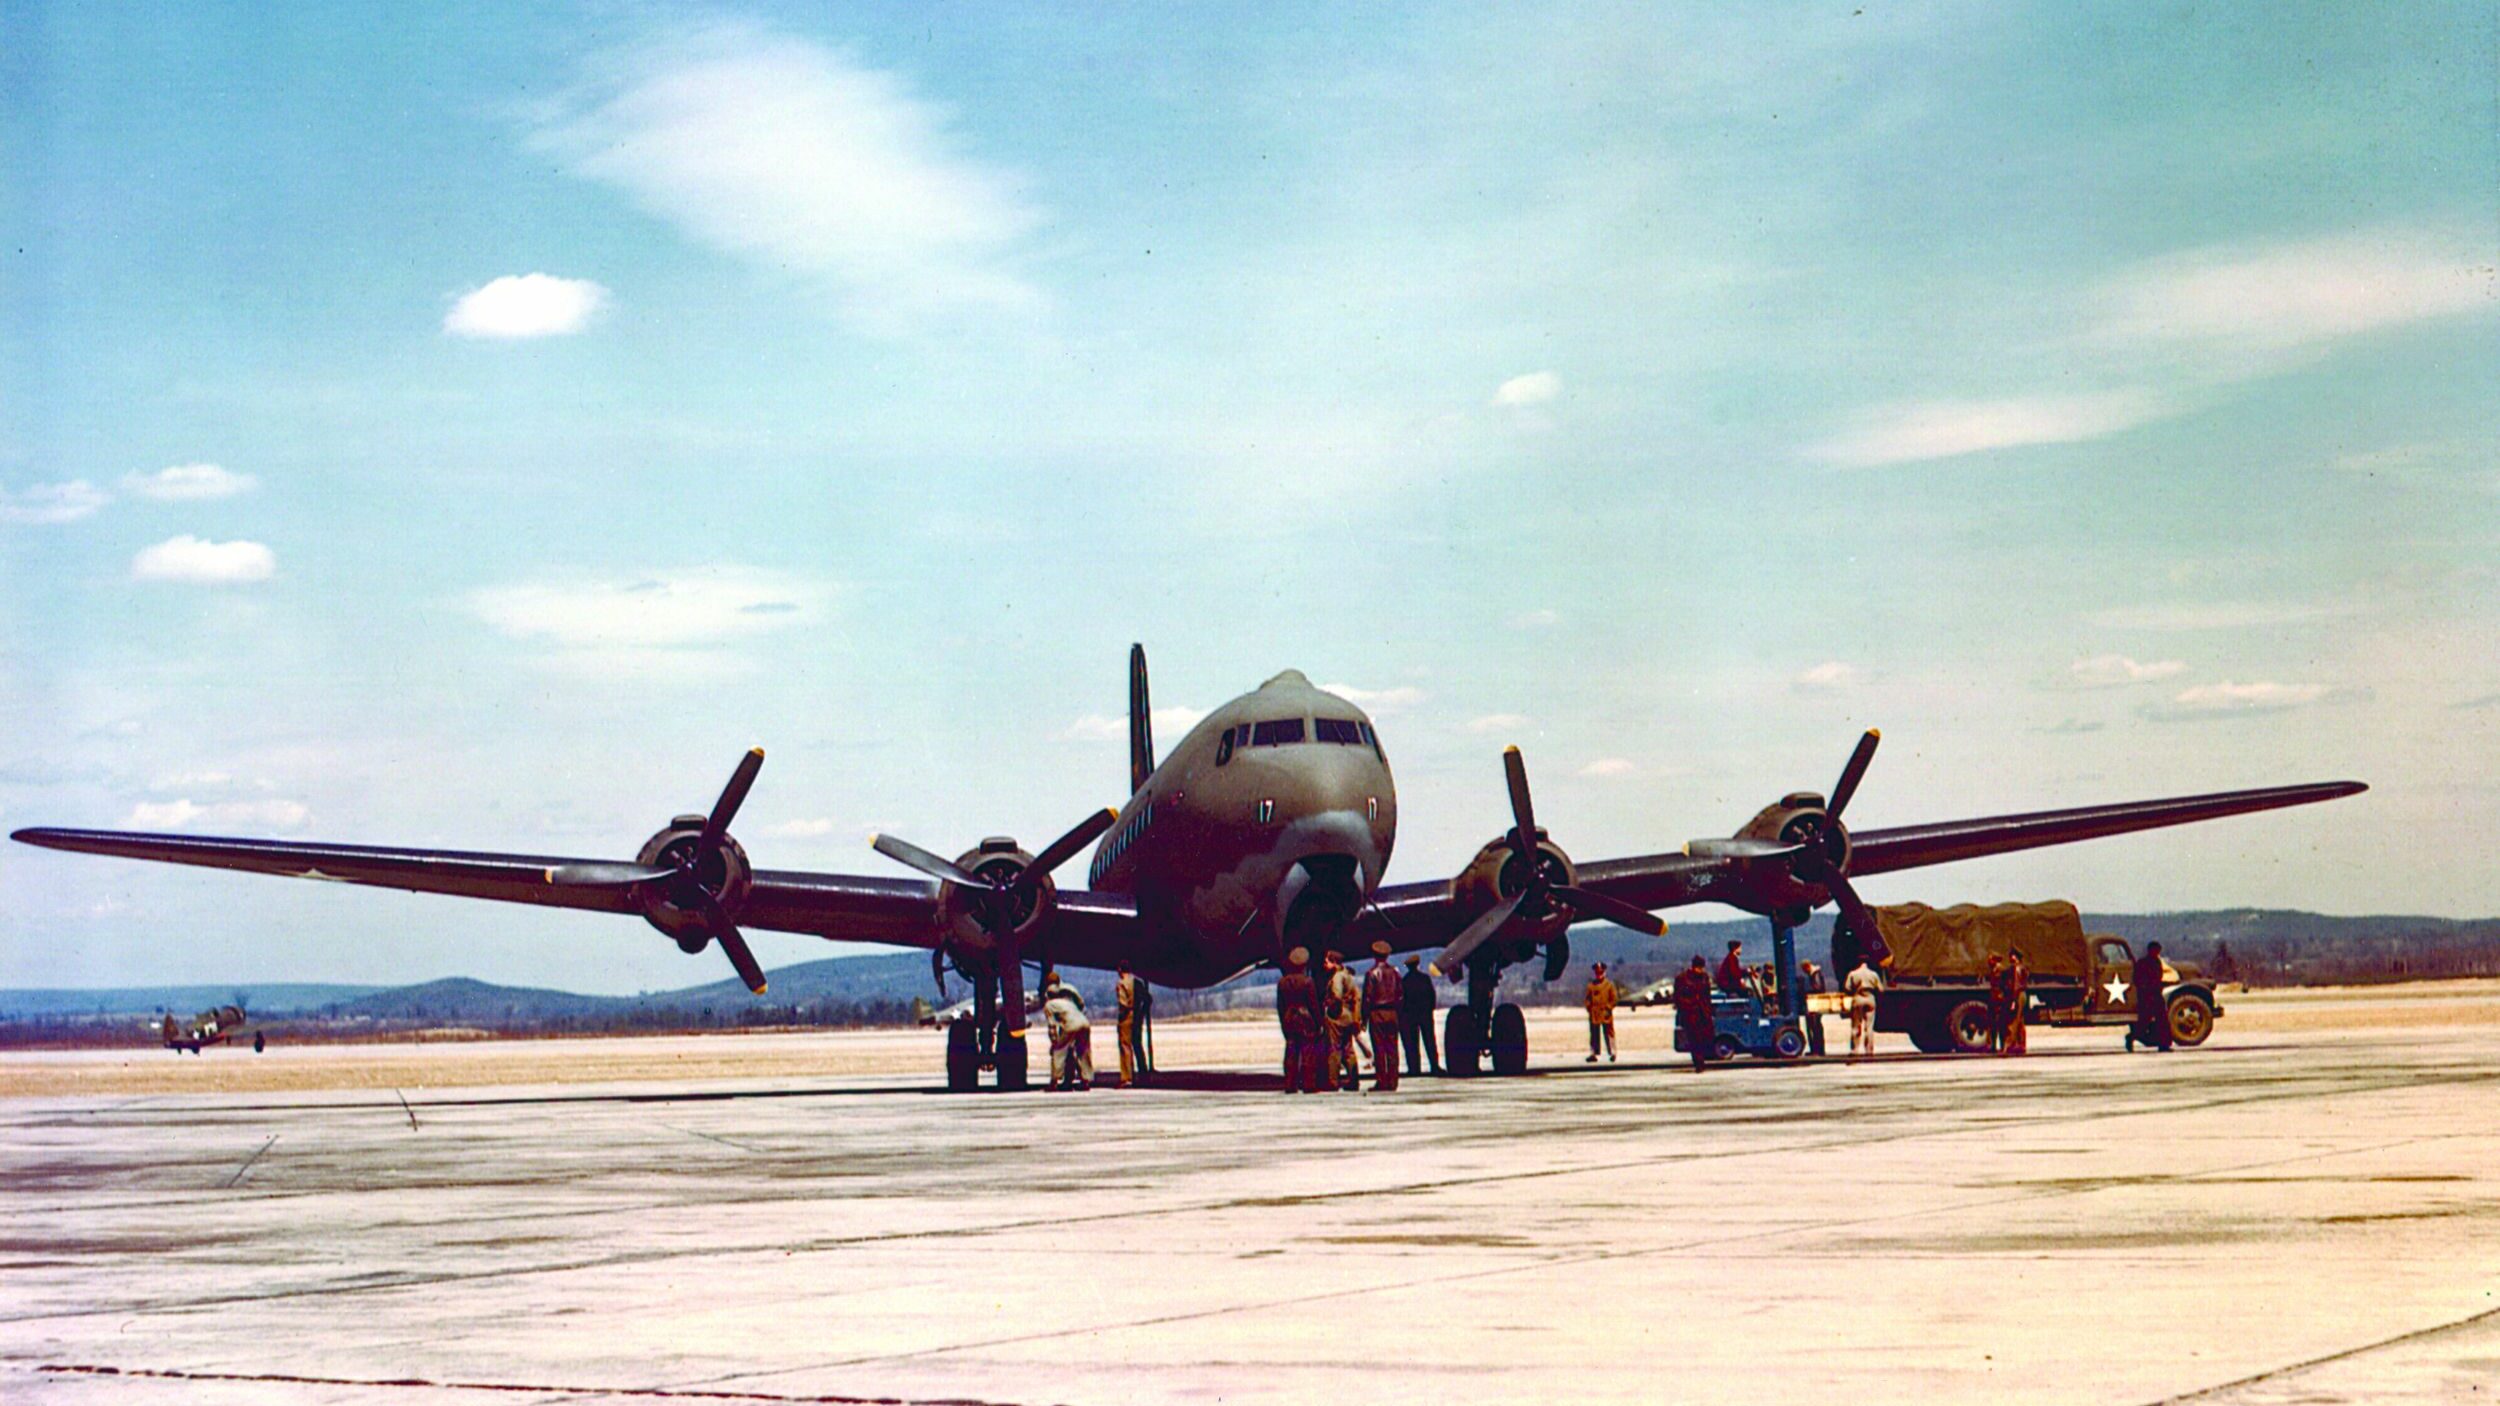 A C-54 cargo plane is loaded with supplies for the long journey across the mountains to China. After the Japanese had cut overland supply routes, the only method of transportation that could be counted on was through the air.